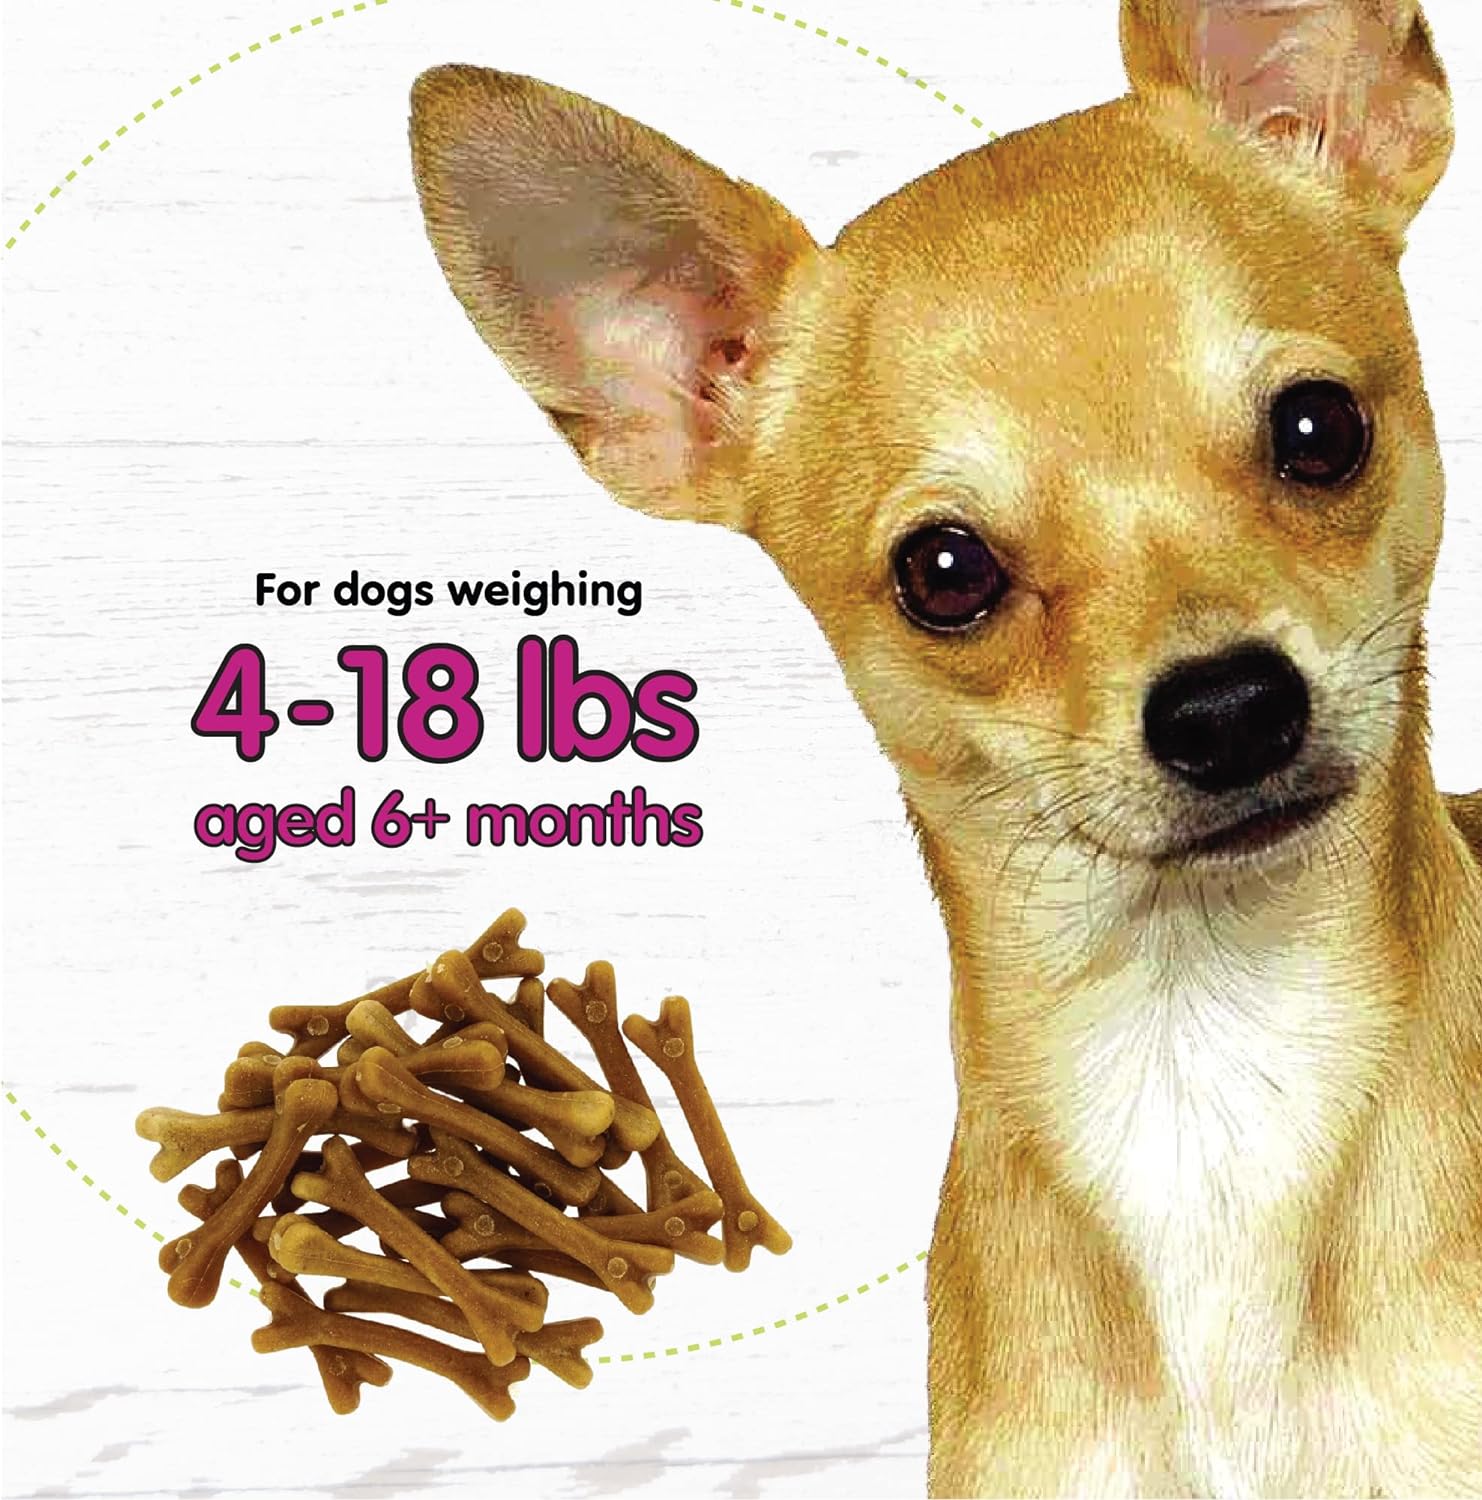 FIDO NATURALS Belly Bones for Dogs, 21 Yogurt Flavor Mini Dog Dental Treats (Made in USA) - 21 Count Dog Treats for Small Dogs - Plaque and Tartar Control for Fresh Breath, Digestive Health Support : Pet Digestive Remedies Pet Treat Bones Pet Chew Toys : Pet Supplies